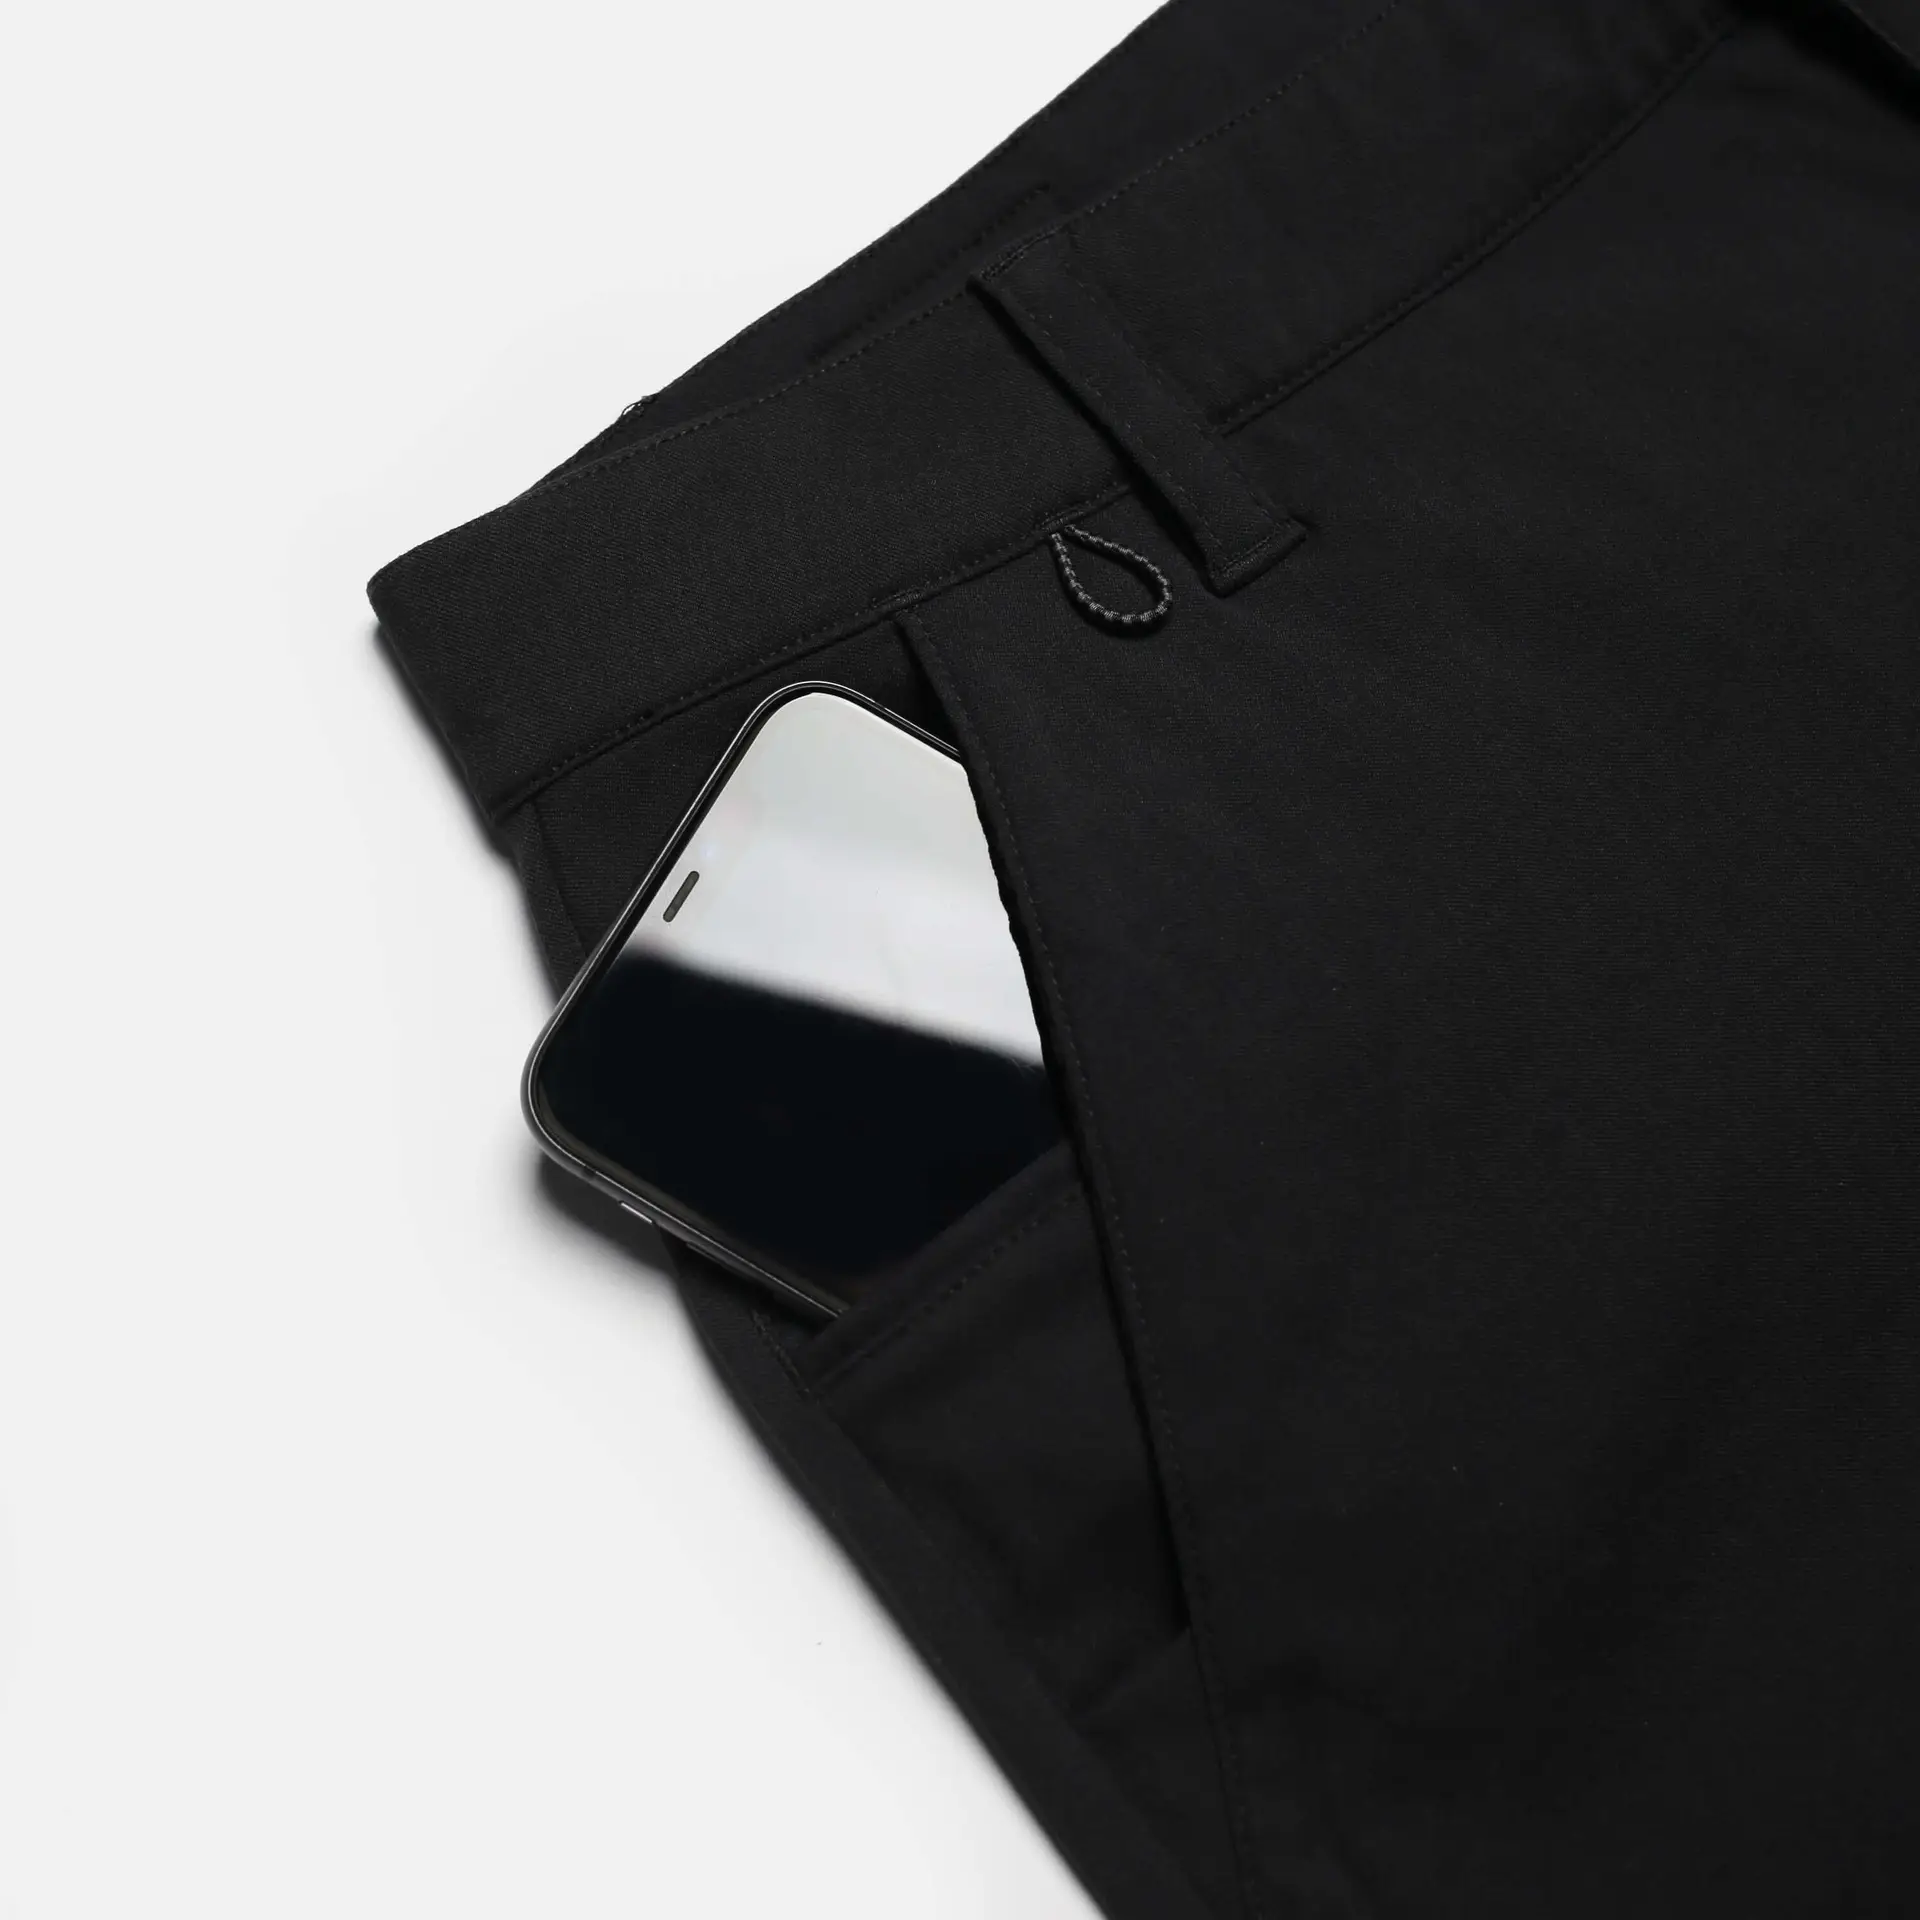 TRUE Linkswear All-Day Chinos -  Use code "BREAKING15" to save 15%!